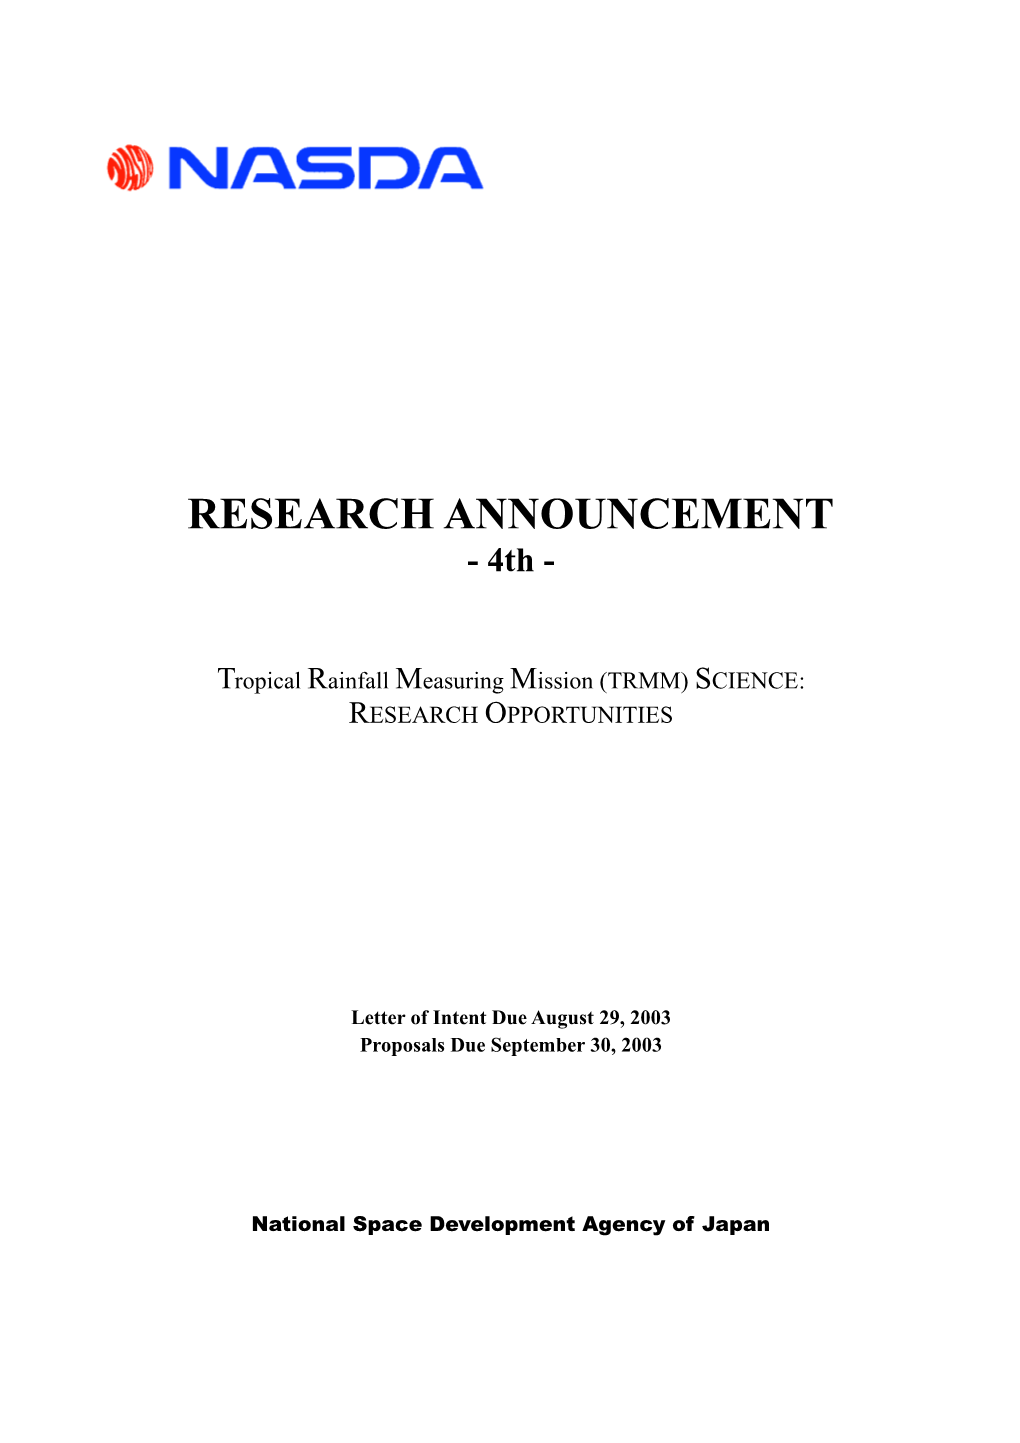 Research Announcement